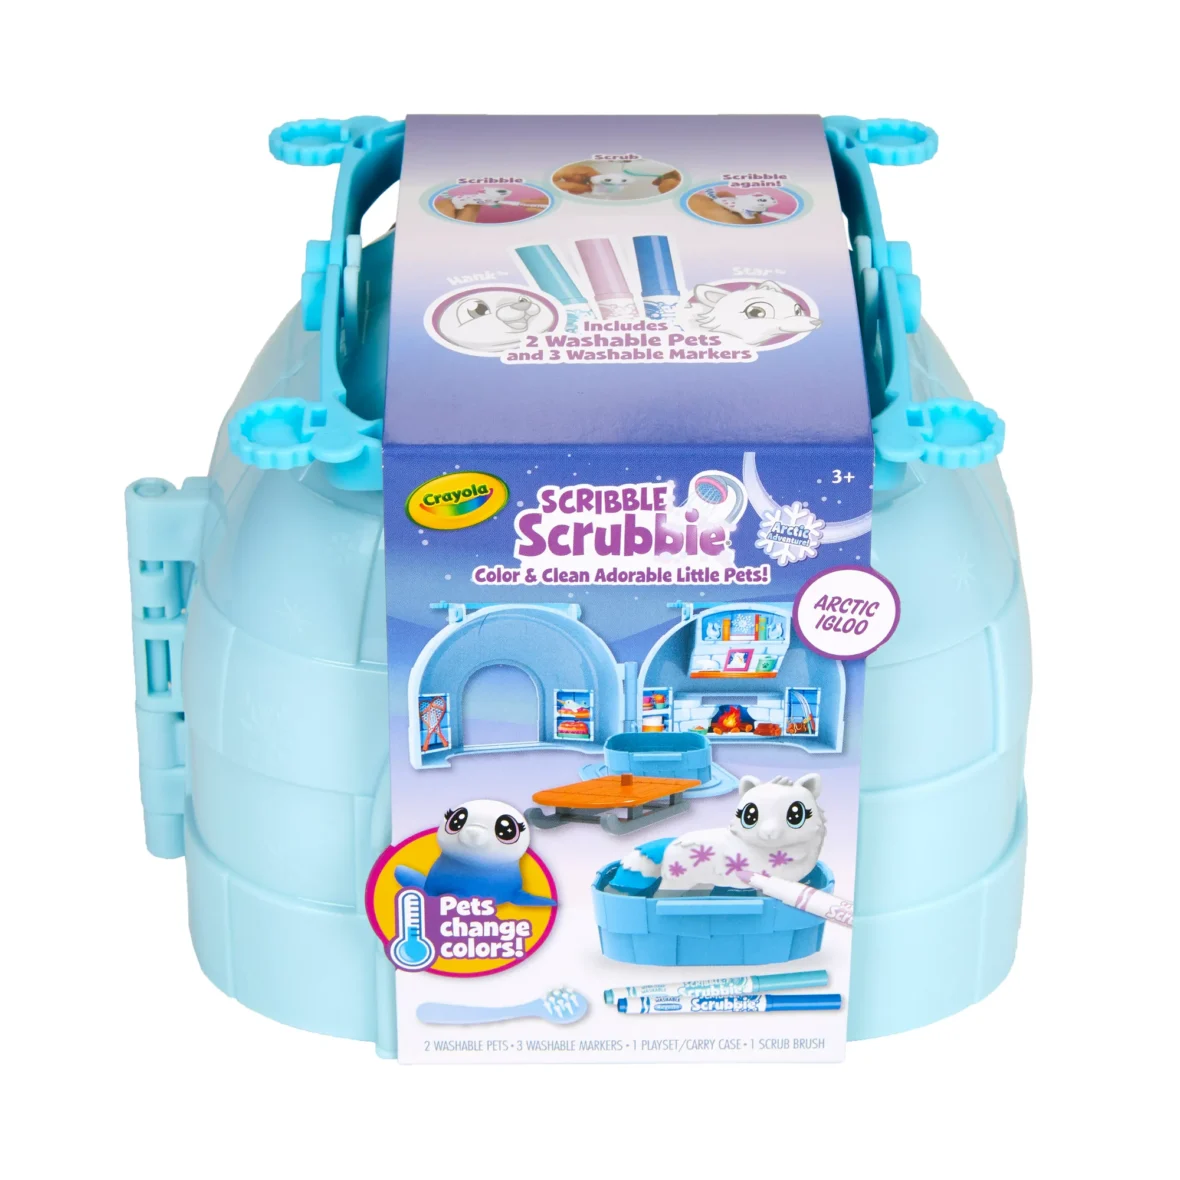 Crayola Scribble Scrubbie Igloo Toy Set, Holiday Toy Gift for Kids, Beginner Child Art Toy Kit